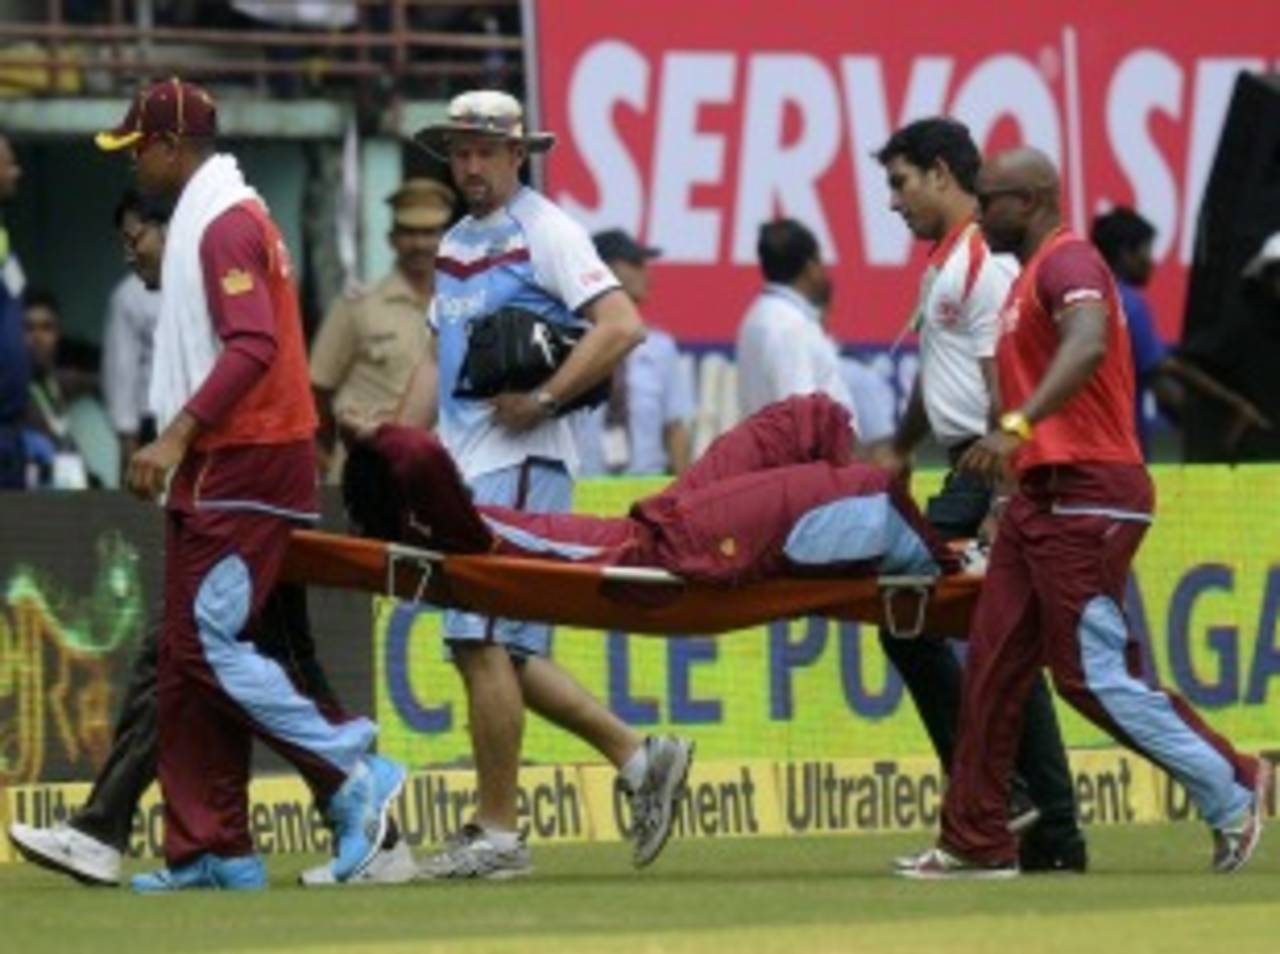 The paramedic staff had to use all available help while taking Chris Gayle on a stretcher&nbsp;&nbsp;&bull;&nbsp;&nbsp;BCCI